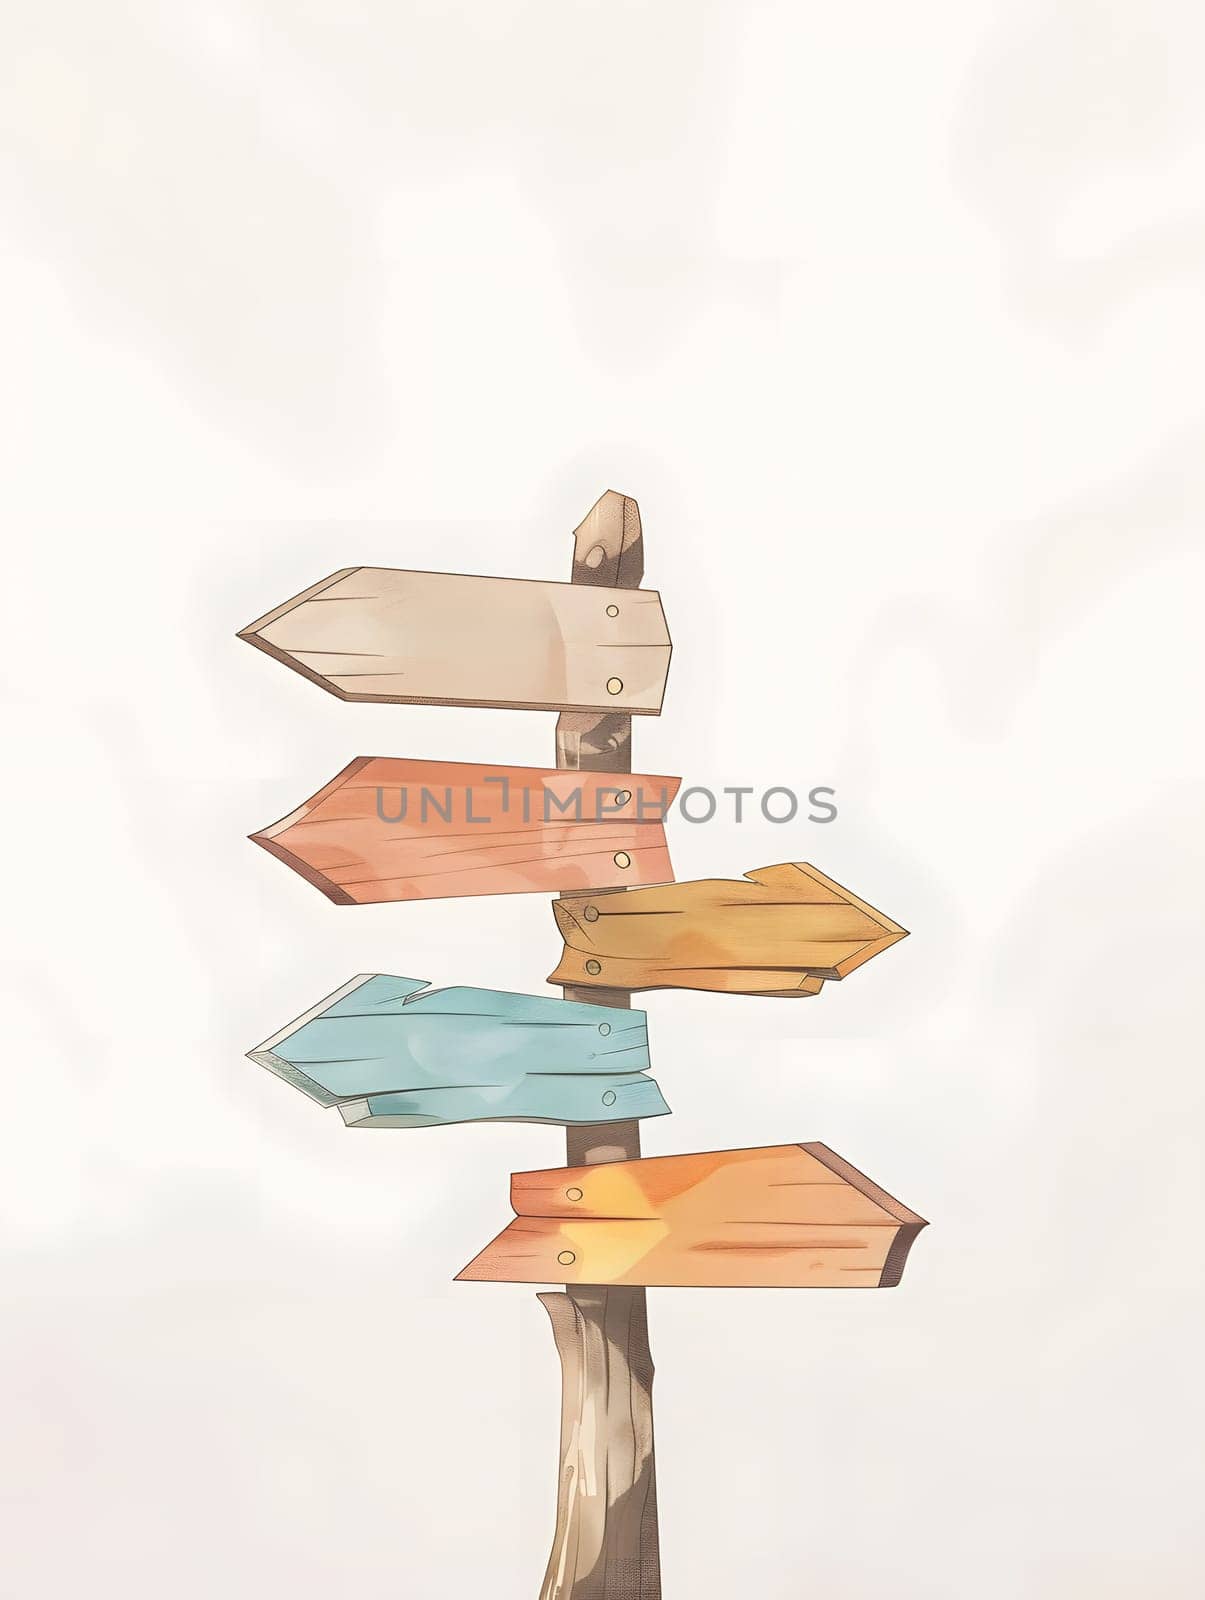 A rectangular wooden signpost with arrows pointing in different directions, showcasing the art of wood gesture drawing. The hardwood balance of font and painting creates a captivating illustration